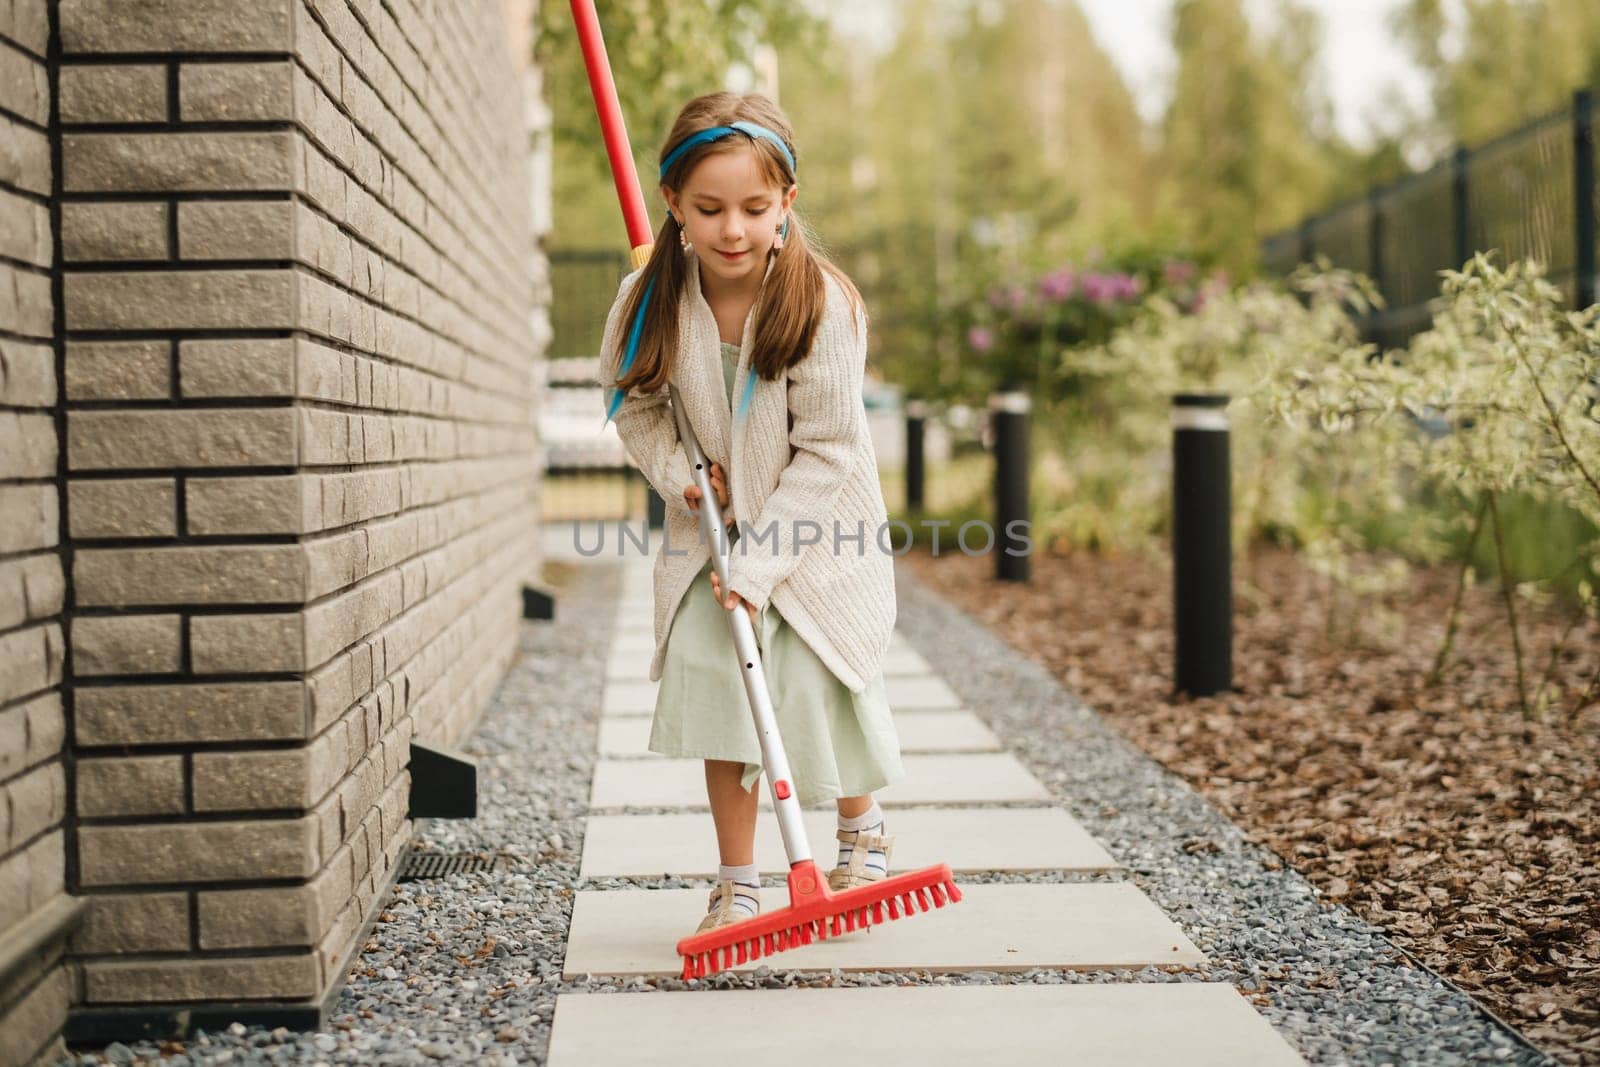 A little girl with a brush cleans a path on the street in the courtyard.